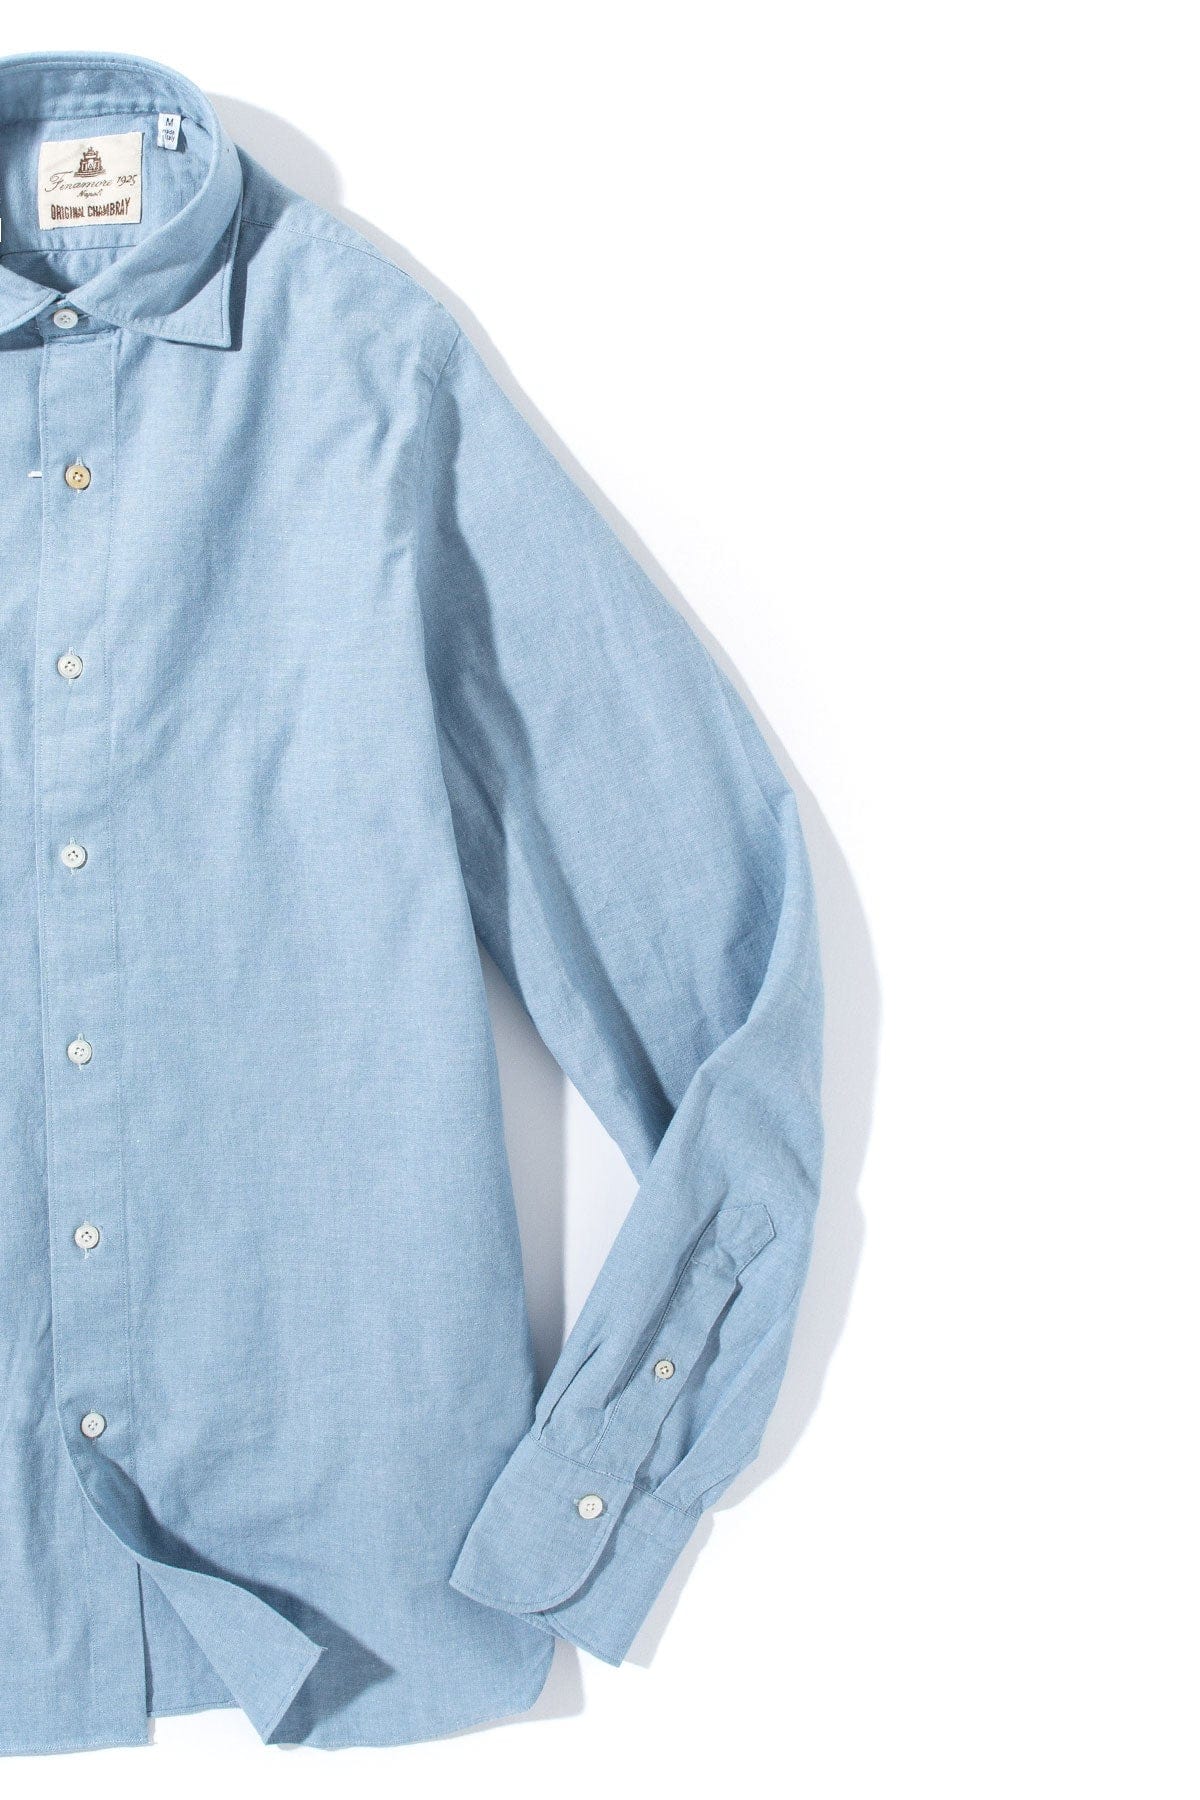 Lienz Chambray Shirt In Blue - AXEL'S